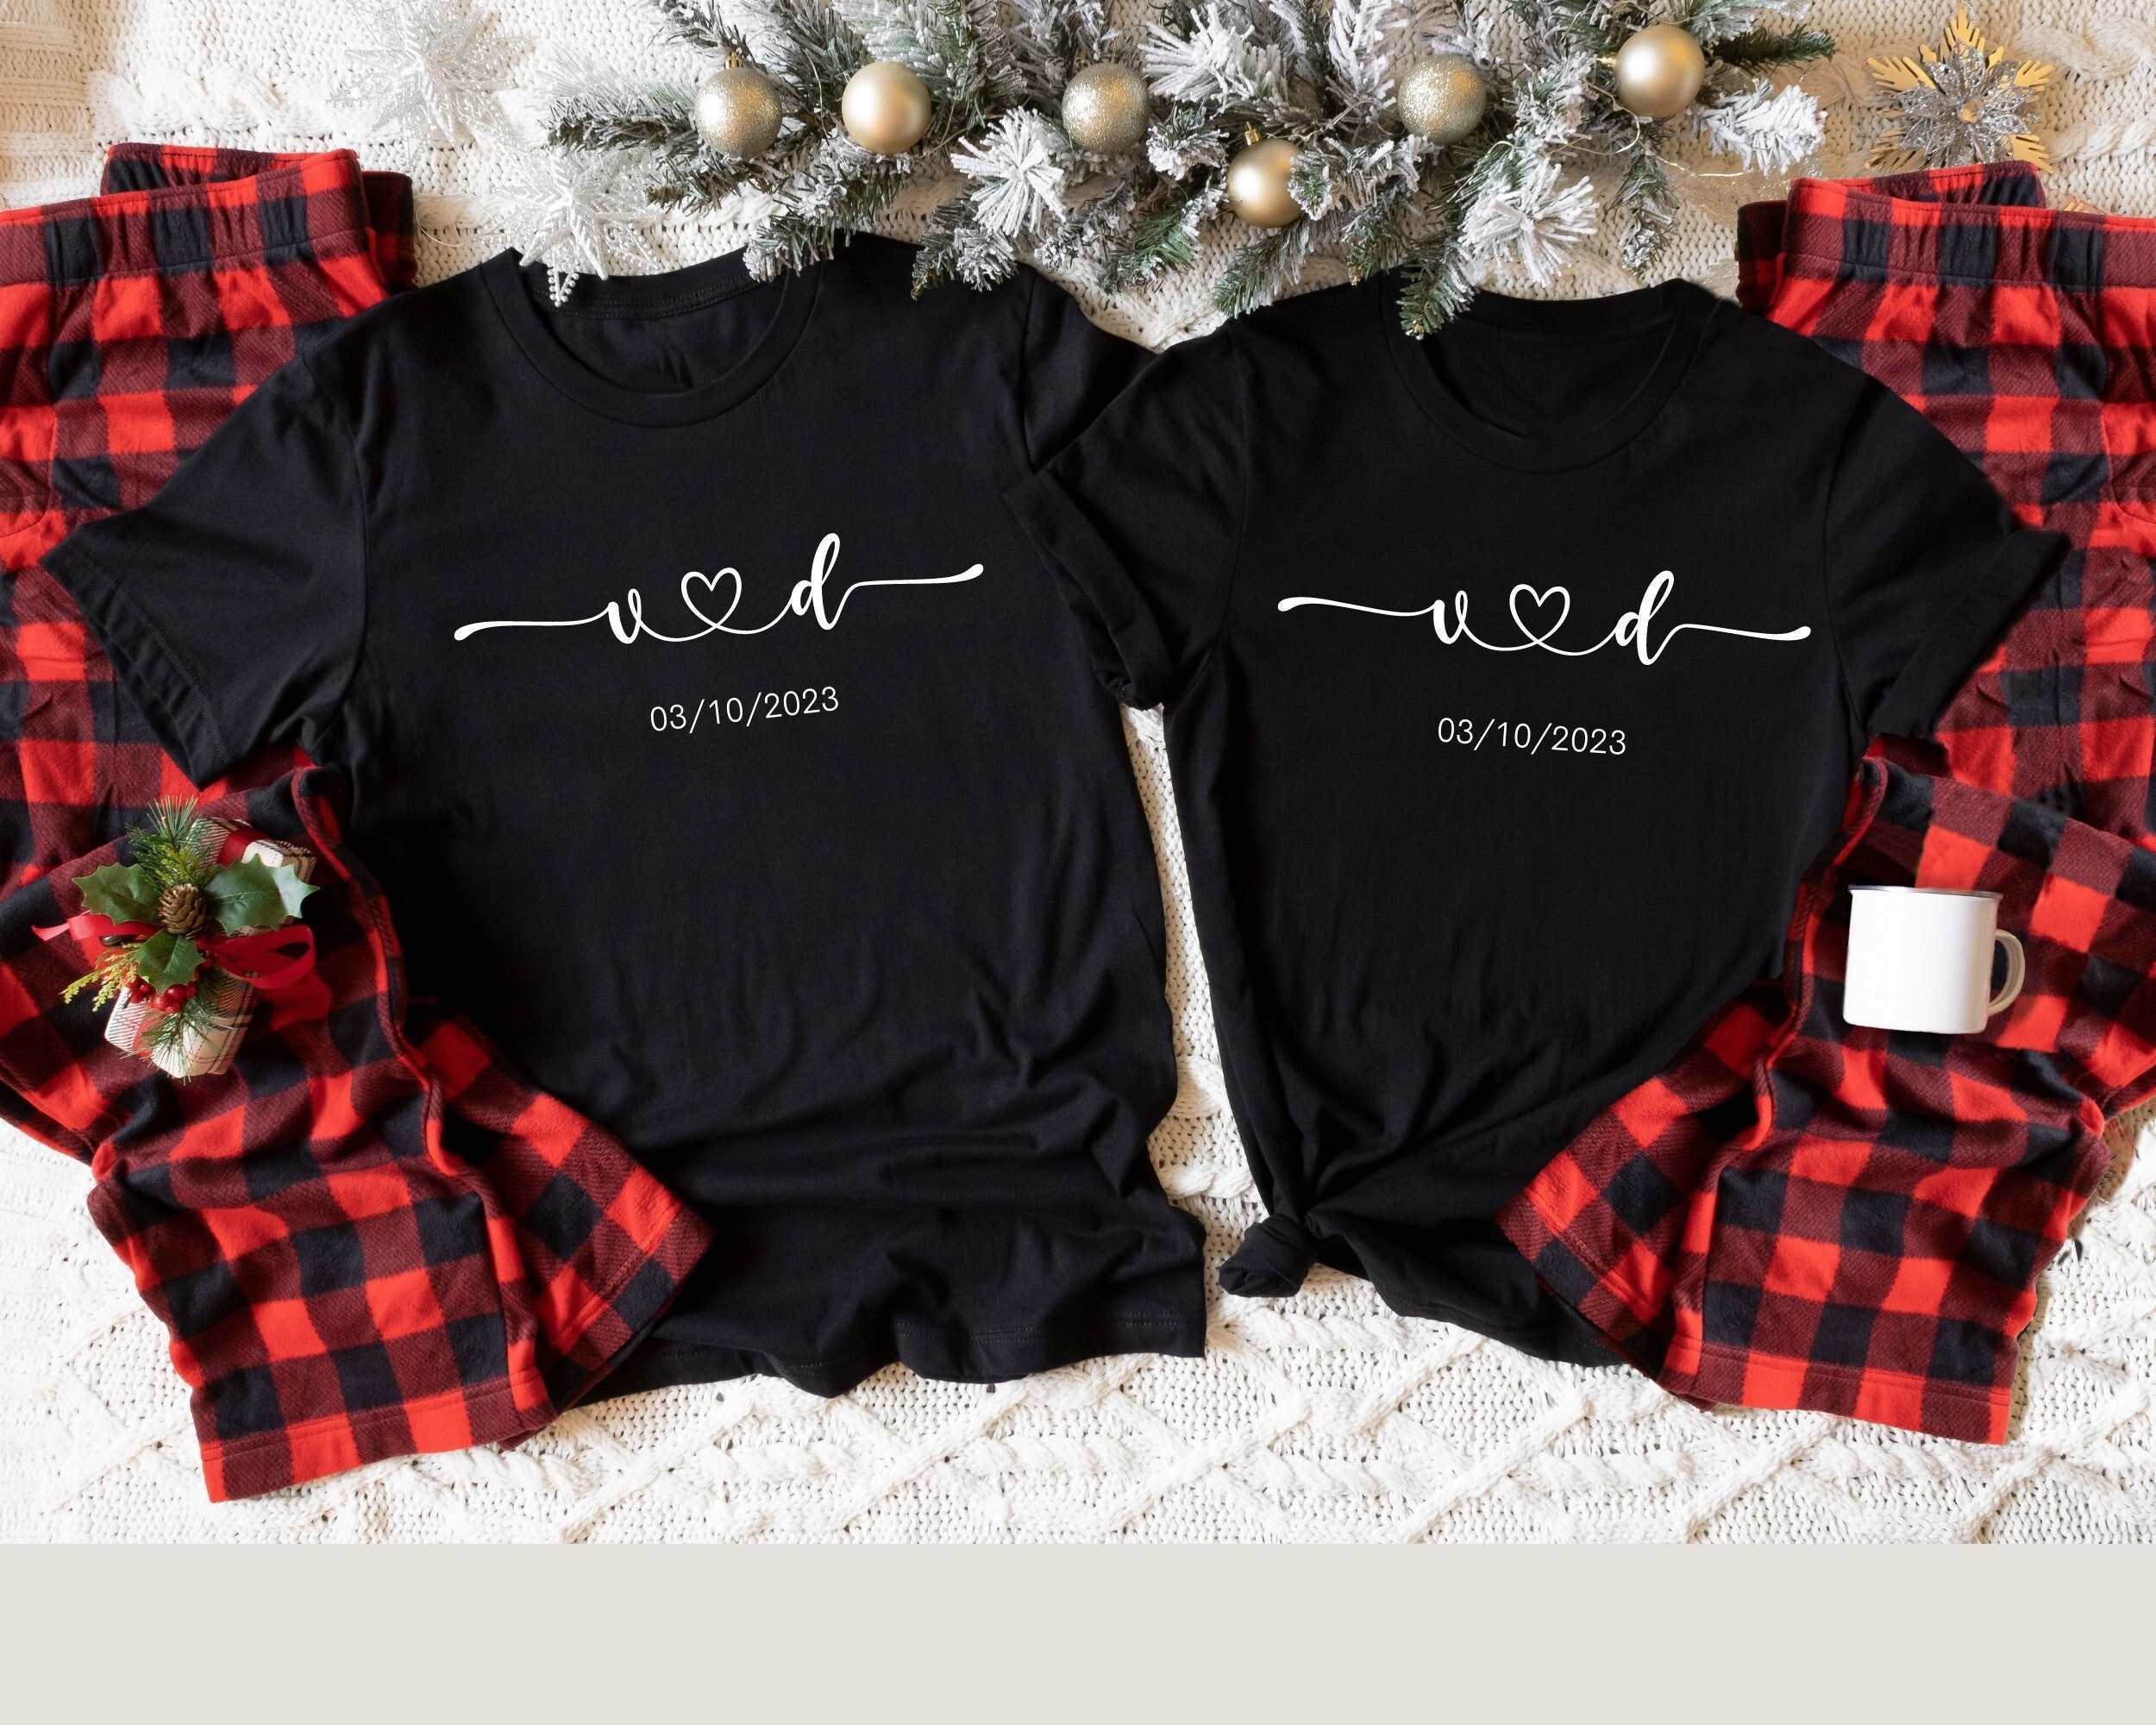 His & Hers Couple Matching Pajamas, Personalized Anniversary Gift, Gift for  Husband, Husband Wife Valentines Day Gift, Boyfriend Gift GG22 